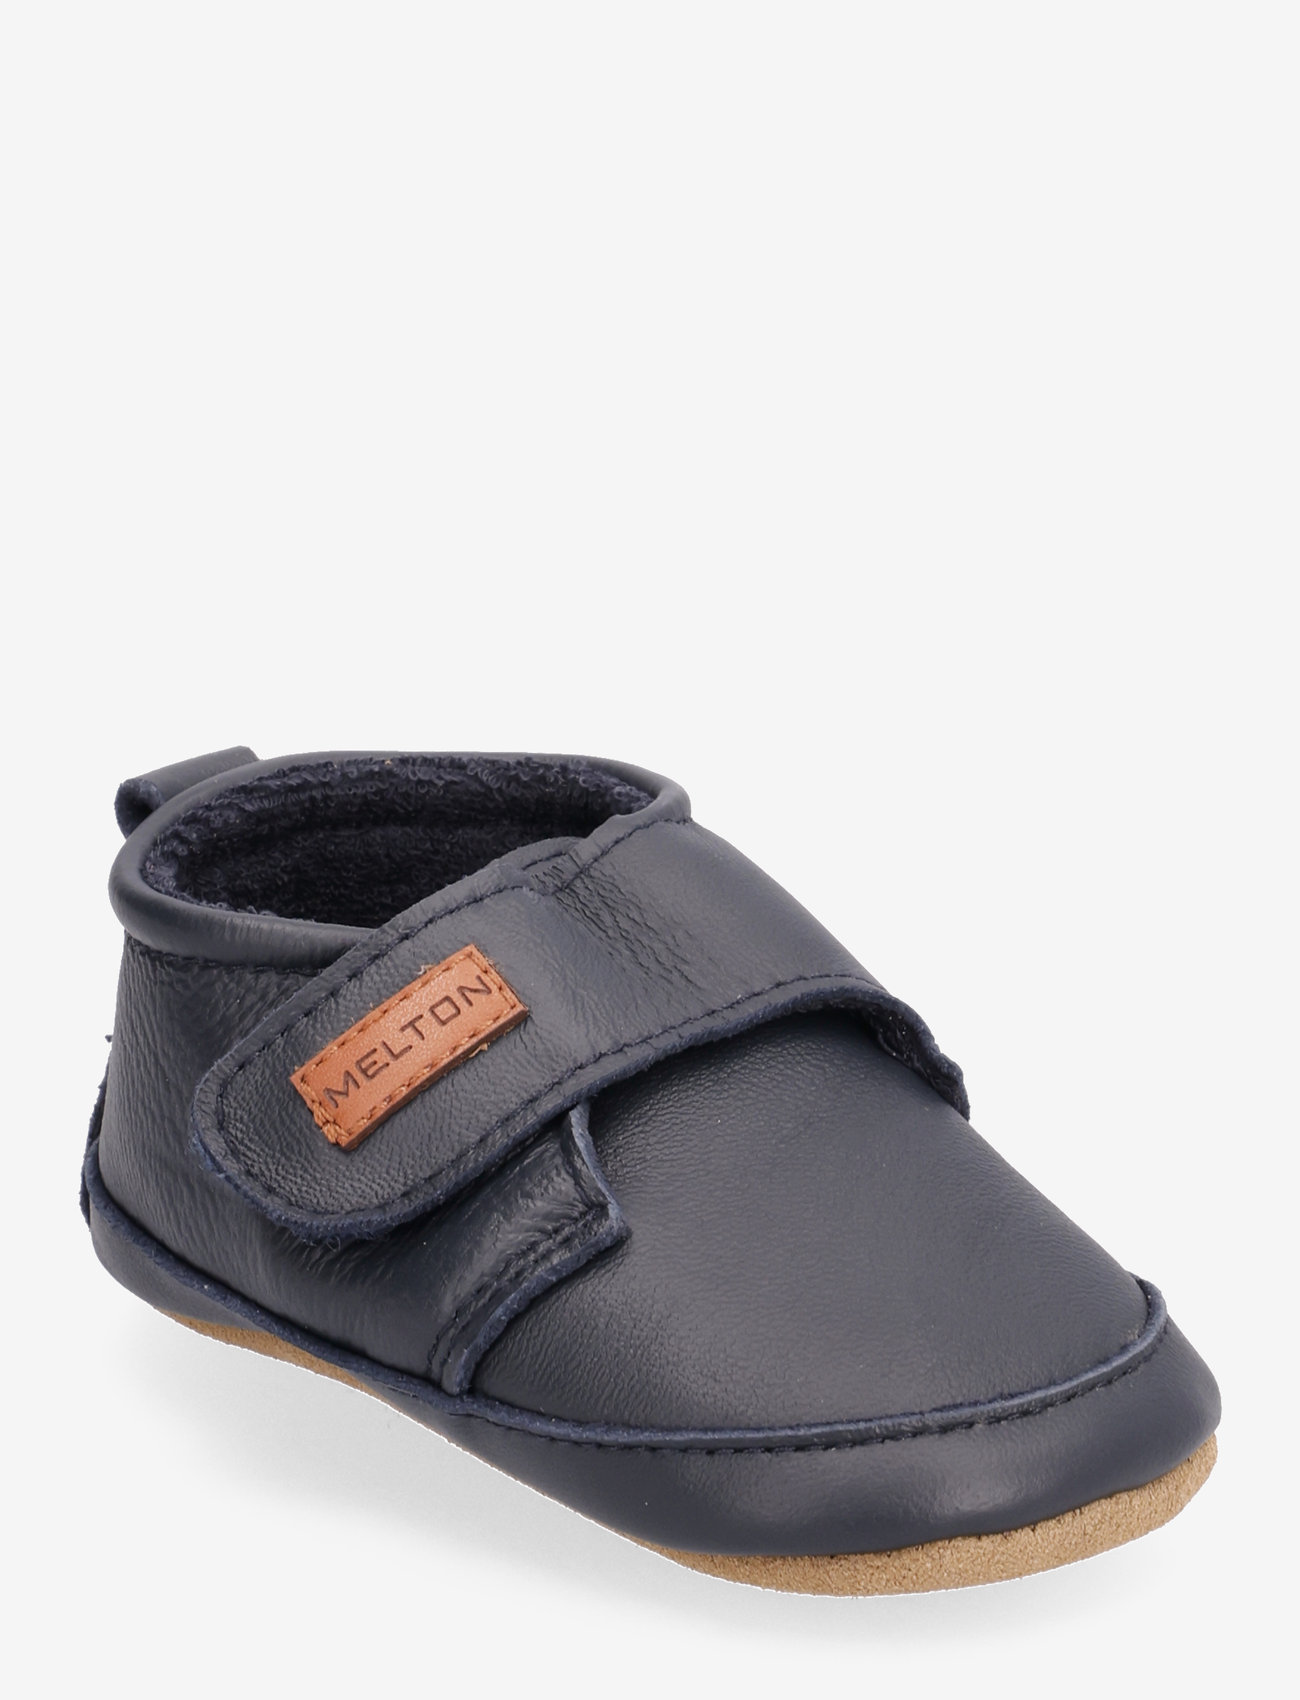 Melton - Classic leather slippers - lowest prices - marine - 0